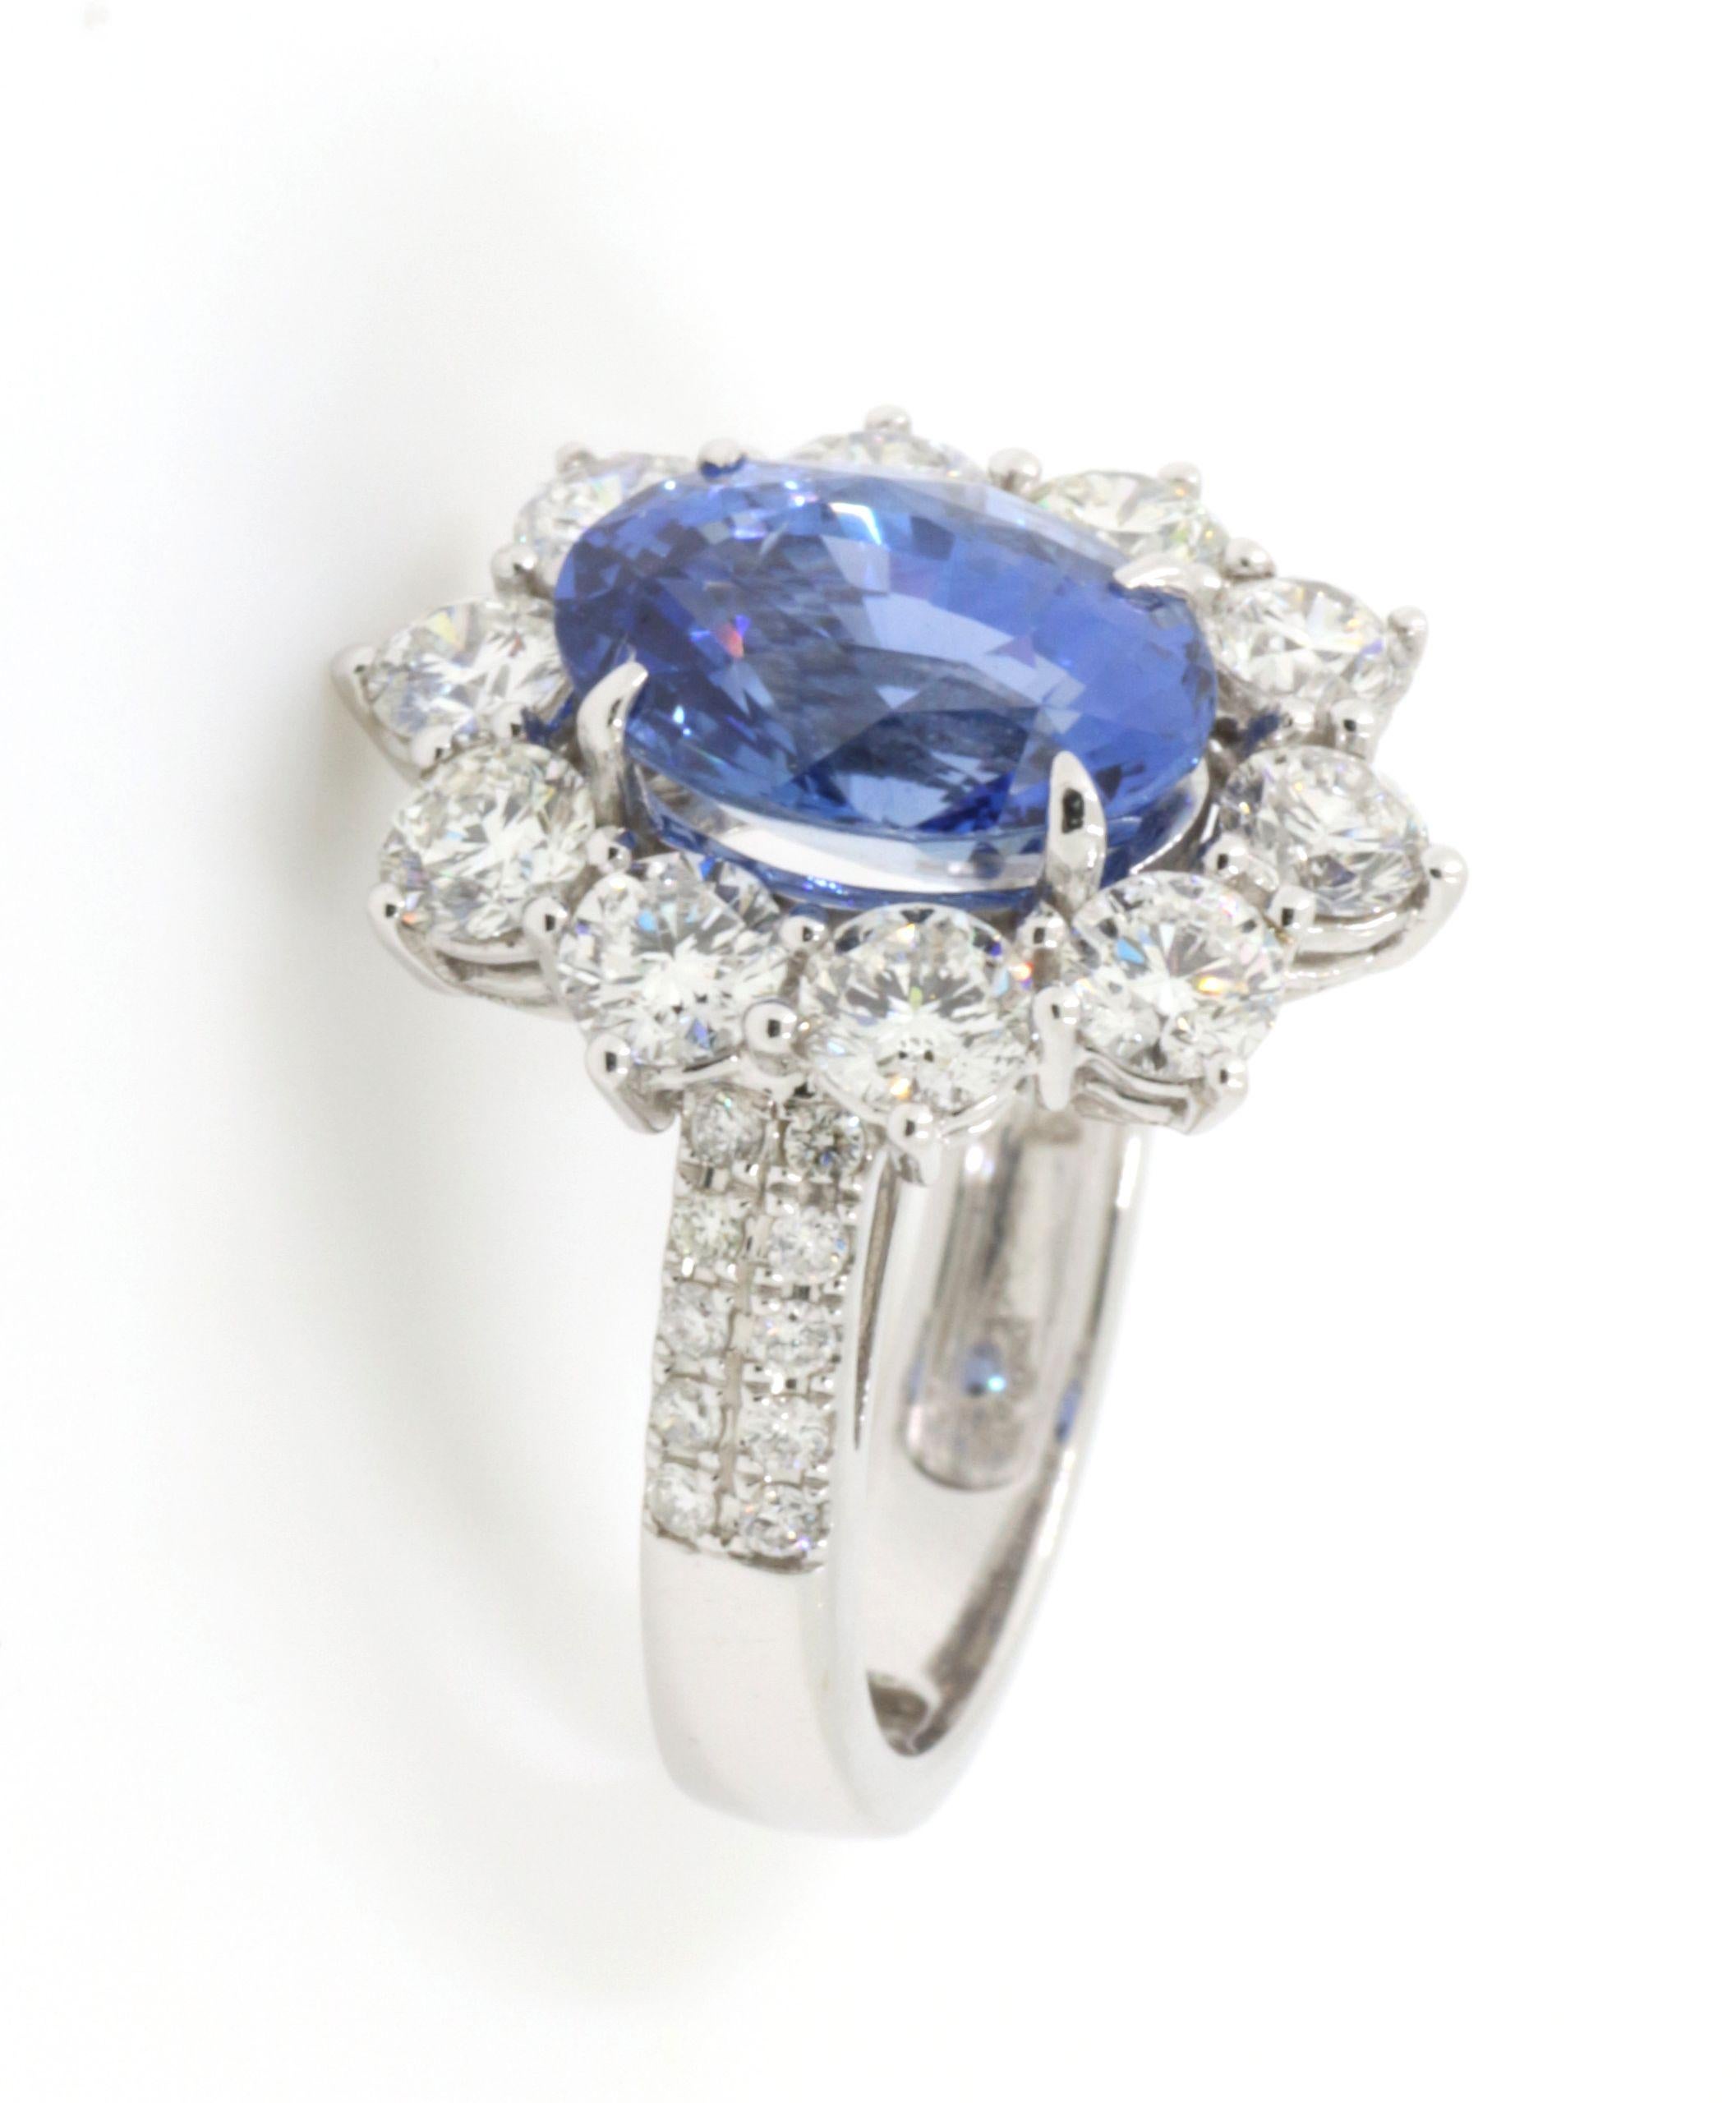 This luxurious ring is a true treasure, featuring a breathtaking GRS certified Sri Lanka blue sapphire, weighing 5.55 carats. The sapphire's rich, deep blue is reminiscent of the ocean's depths, offering a mesmerizing centerpiece that is both bold